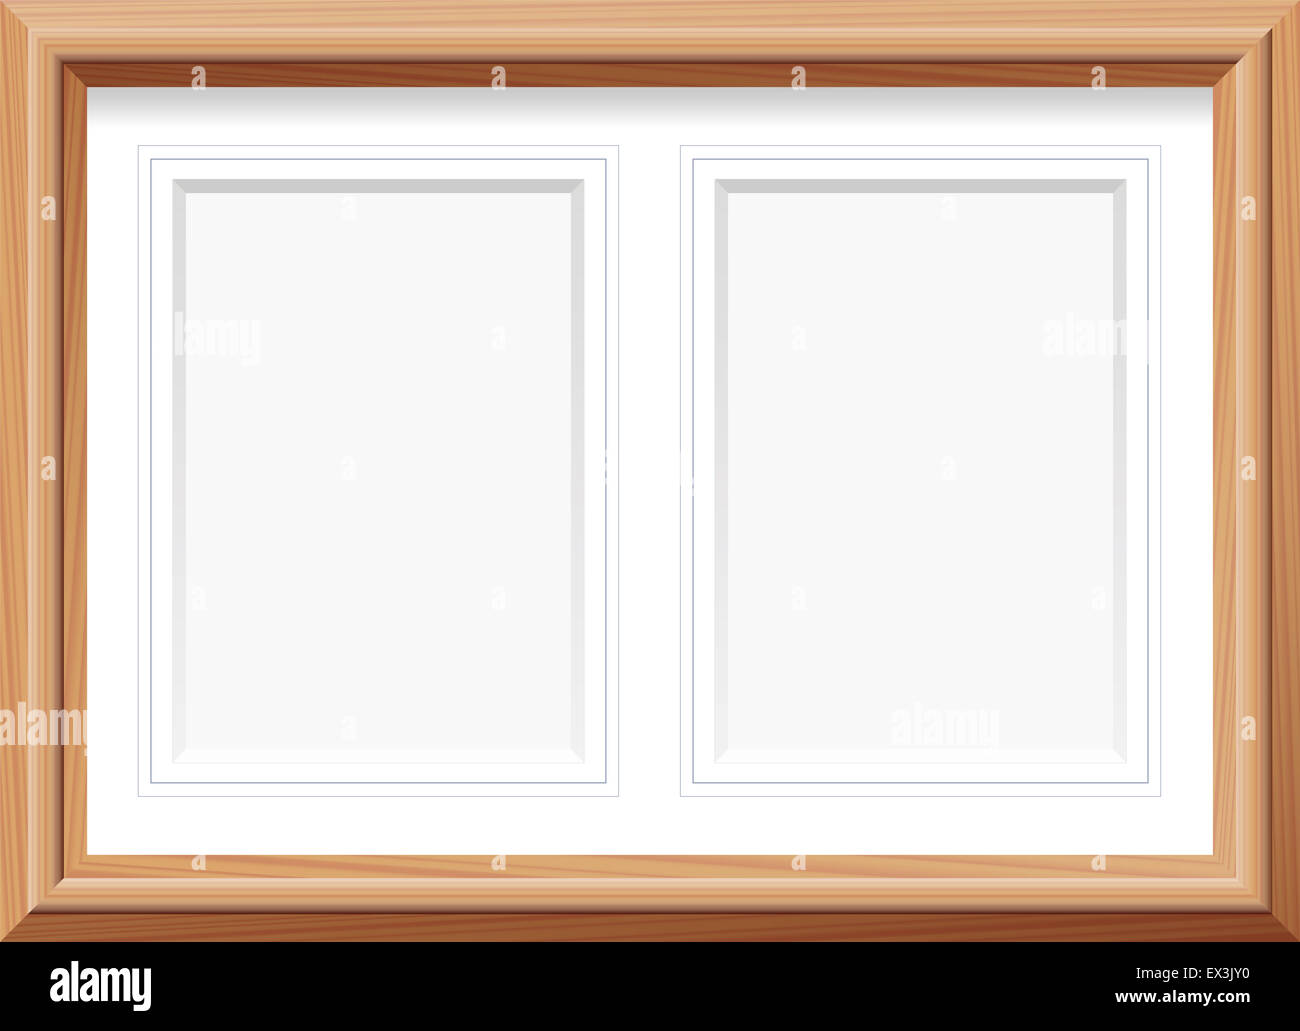 Horizontal picture frame with two portrait format mats for two pictures. Illustration. Stock Photo